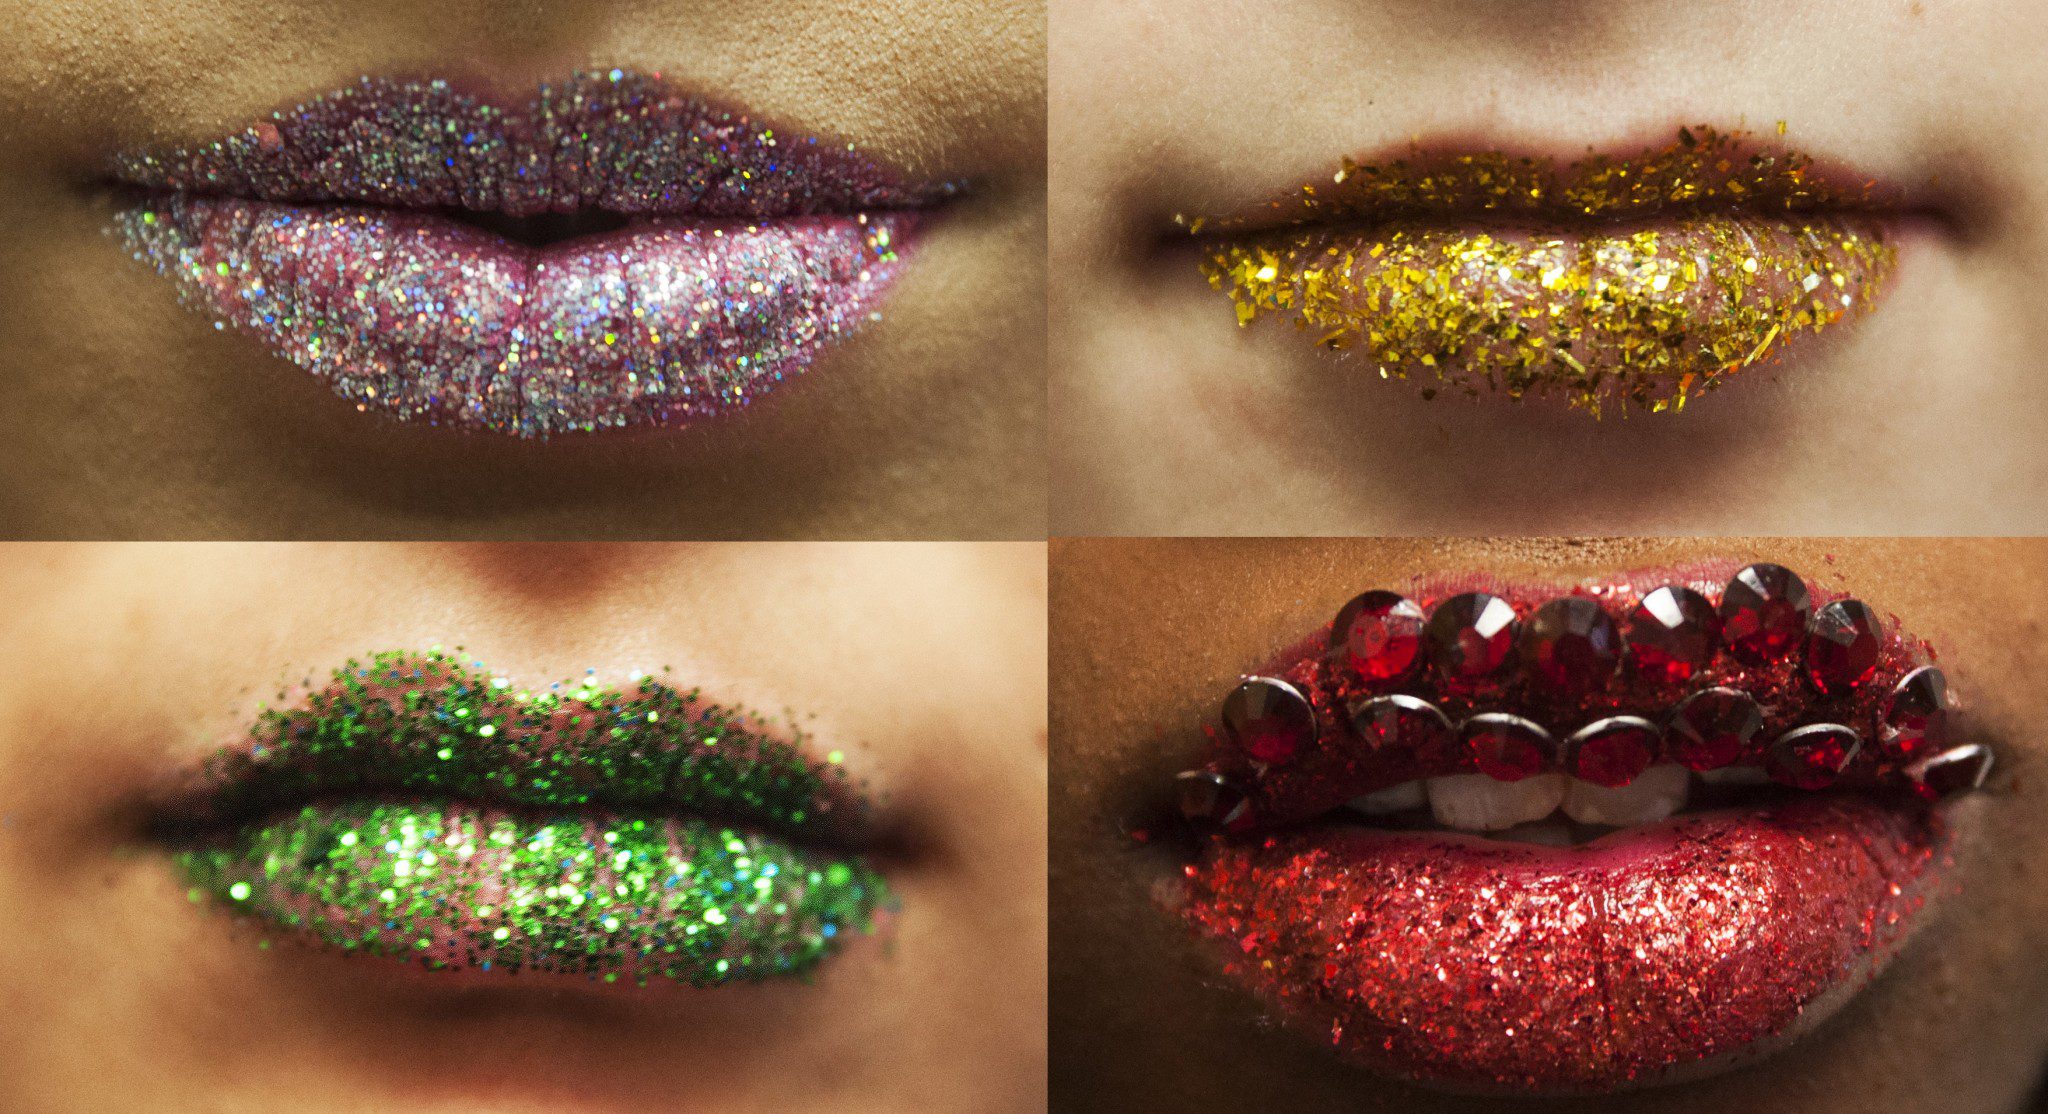 lips made up with glitter